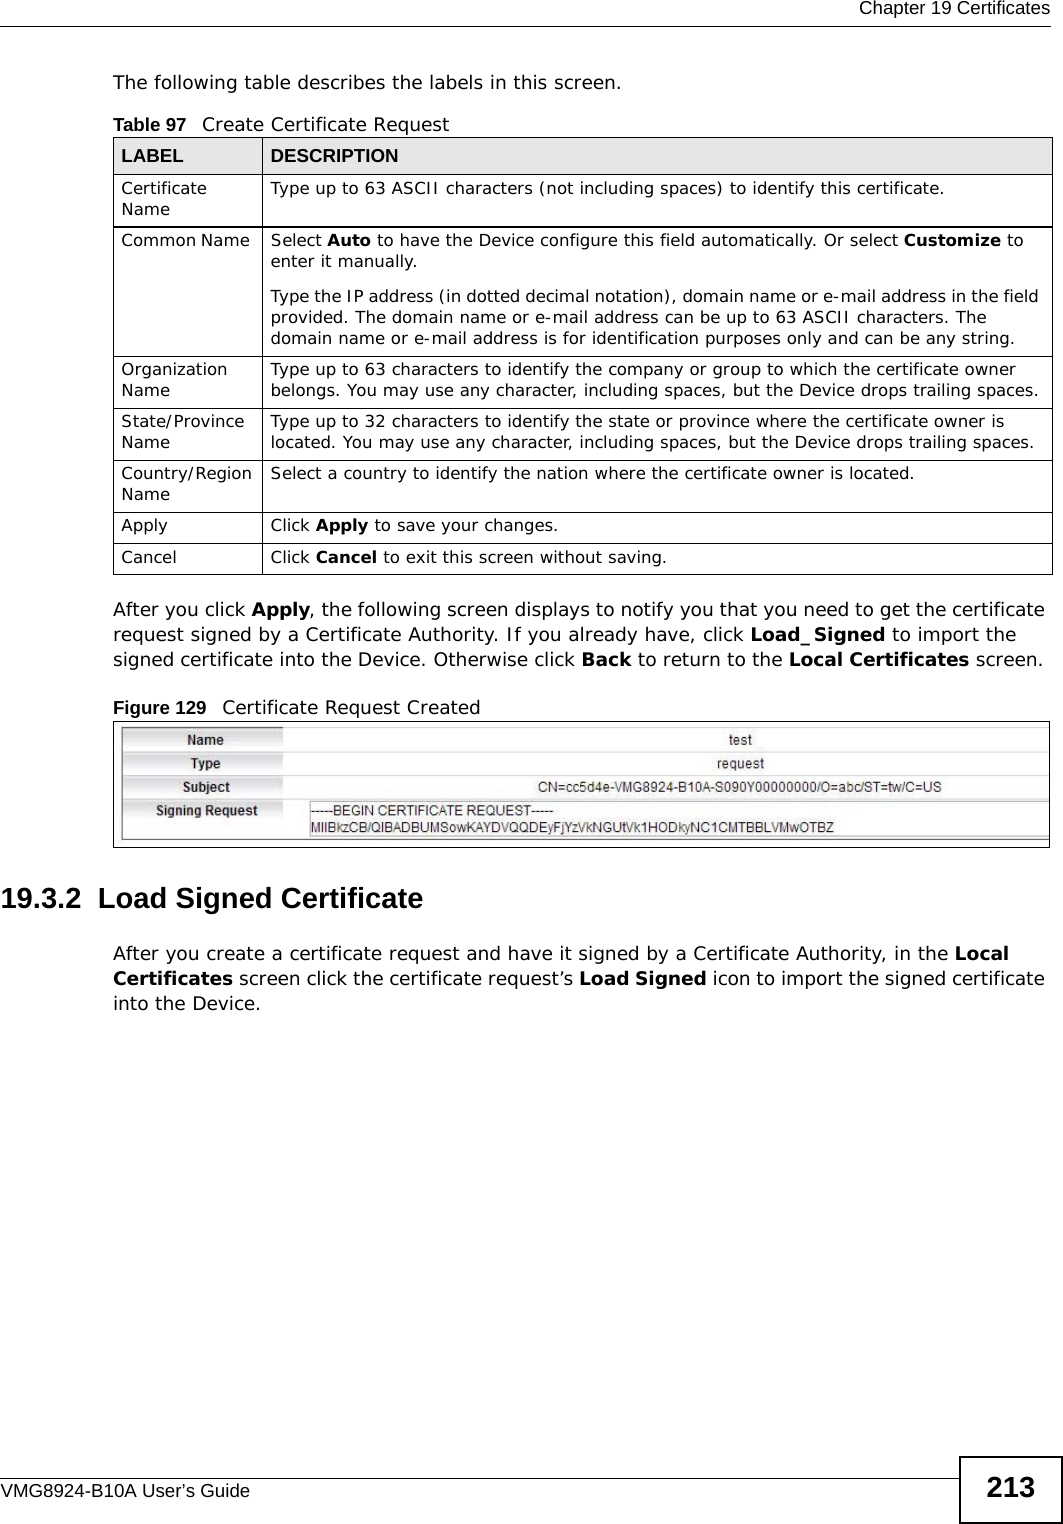  Chapter 19 CertificatesVMG8924-B10A User’s Guide 213The following table describes the labels in this screen. After you click Apply, the following screen displays to notify you that you need to get the certificate request signed by a Certificate Authority. If you already have, click Load_Signed to import the signed certificate into the Device. Otherwise click Back to return to the Local Certificates screen. Figure 129   Certificate Request Created19.3.2  Load Signed Certificate After you create a certificate request and have it signed by a Certificate Authority, in the Local Certificates screen click the certificate request’s Load Signed icon to import the signed certificate into the Device. Table 97   Create Certificate RequestLABEL DESCRIPTIONCertificate Name Type up to 63 ASCII characters (not including spaces) to identify this certificate. Common Name  Select Auto to have the Device configure this field automatically. Or select Customize to enter it manually. Type the IP address (in dotted decimal notation), domain name or e-mail address in the field provided. The domain name or e-mail address can be up to 63 ASCII characters. The domain name or e-mail address is for identification purposes only and can be any string.Organization Name Type up to 63 characters to identify the company or group to which the certificate owner belongs. You may use any character, including spaces, but the Device drops trailing spaces.State/Province Name Type up to 32 characters to identify the state or province where the certificate owner is located. You may use any character, including spaces, but the Device drops trailing spaces.Country/Region Name Select a country to identify the nation where the certificate owner is located. Apply Click Apply to save your changes.Cancel Click Cancel to exit this screen without saving.